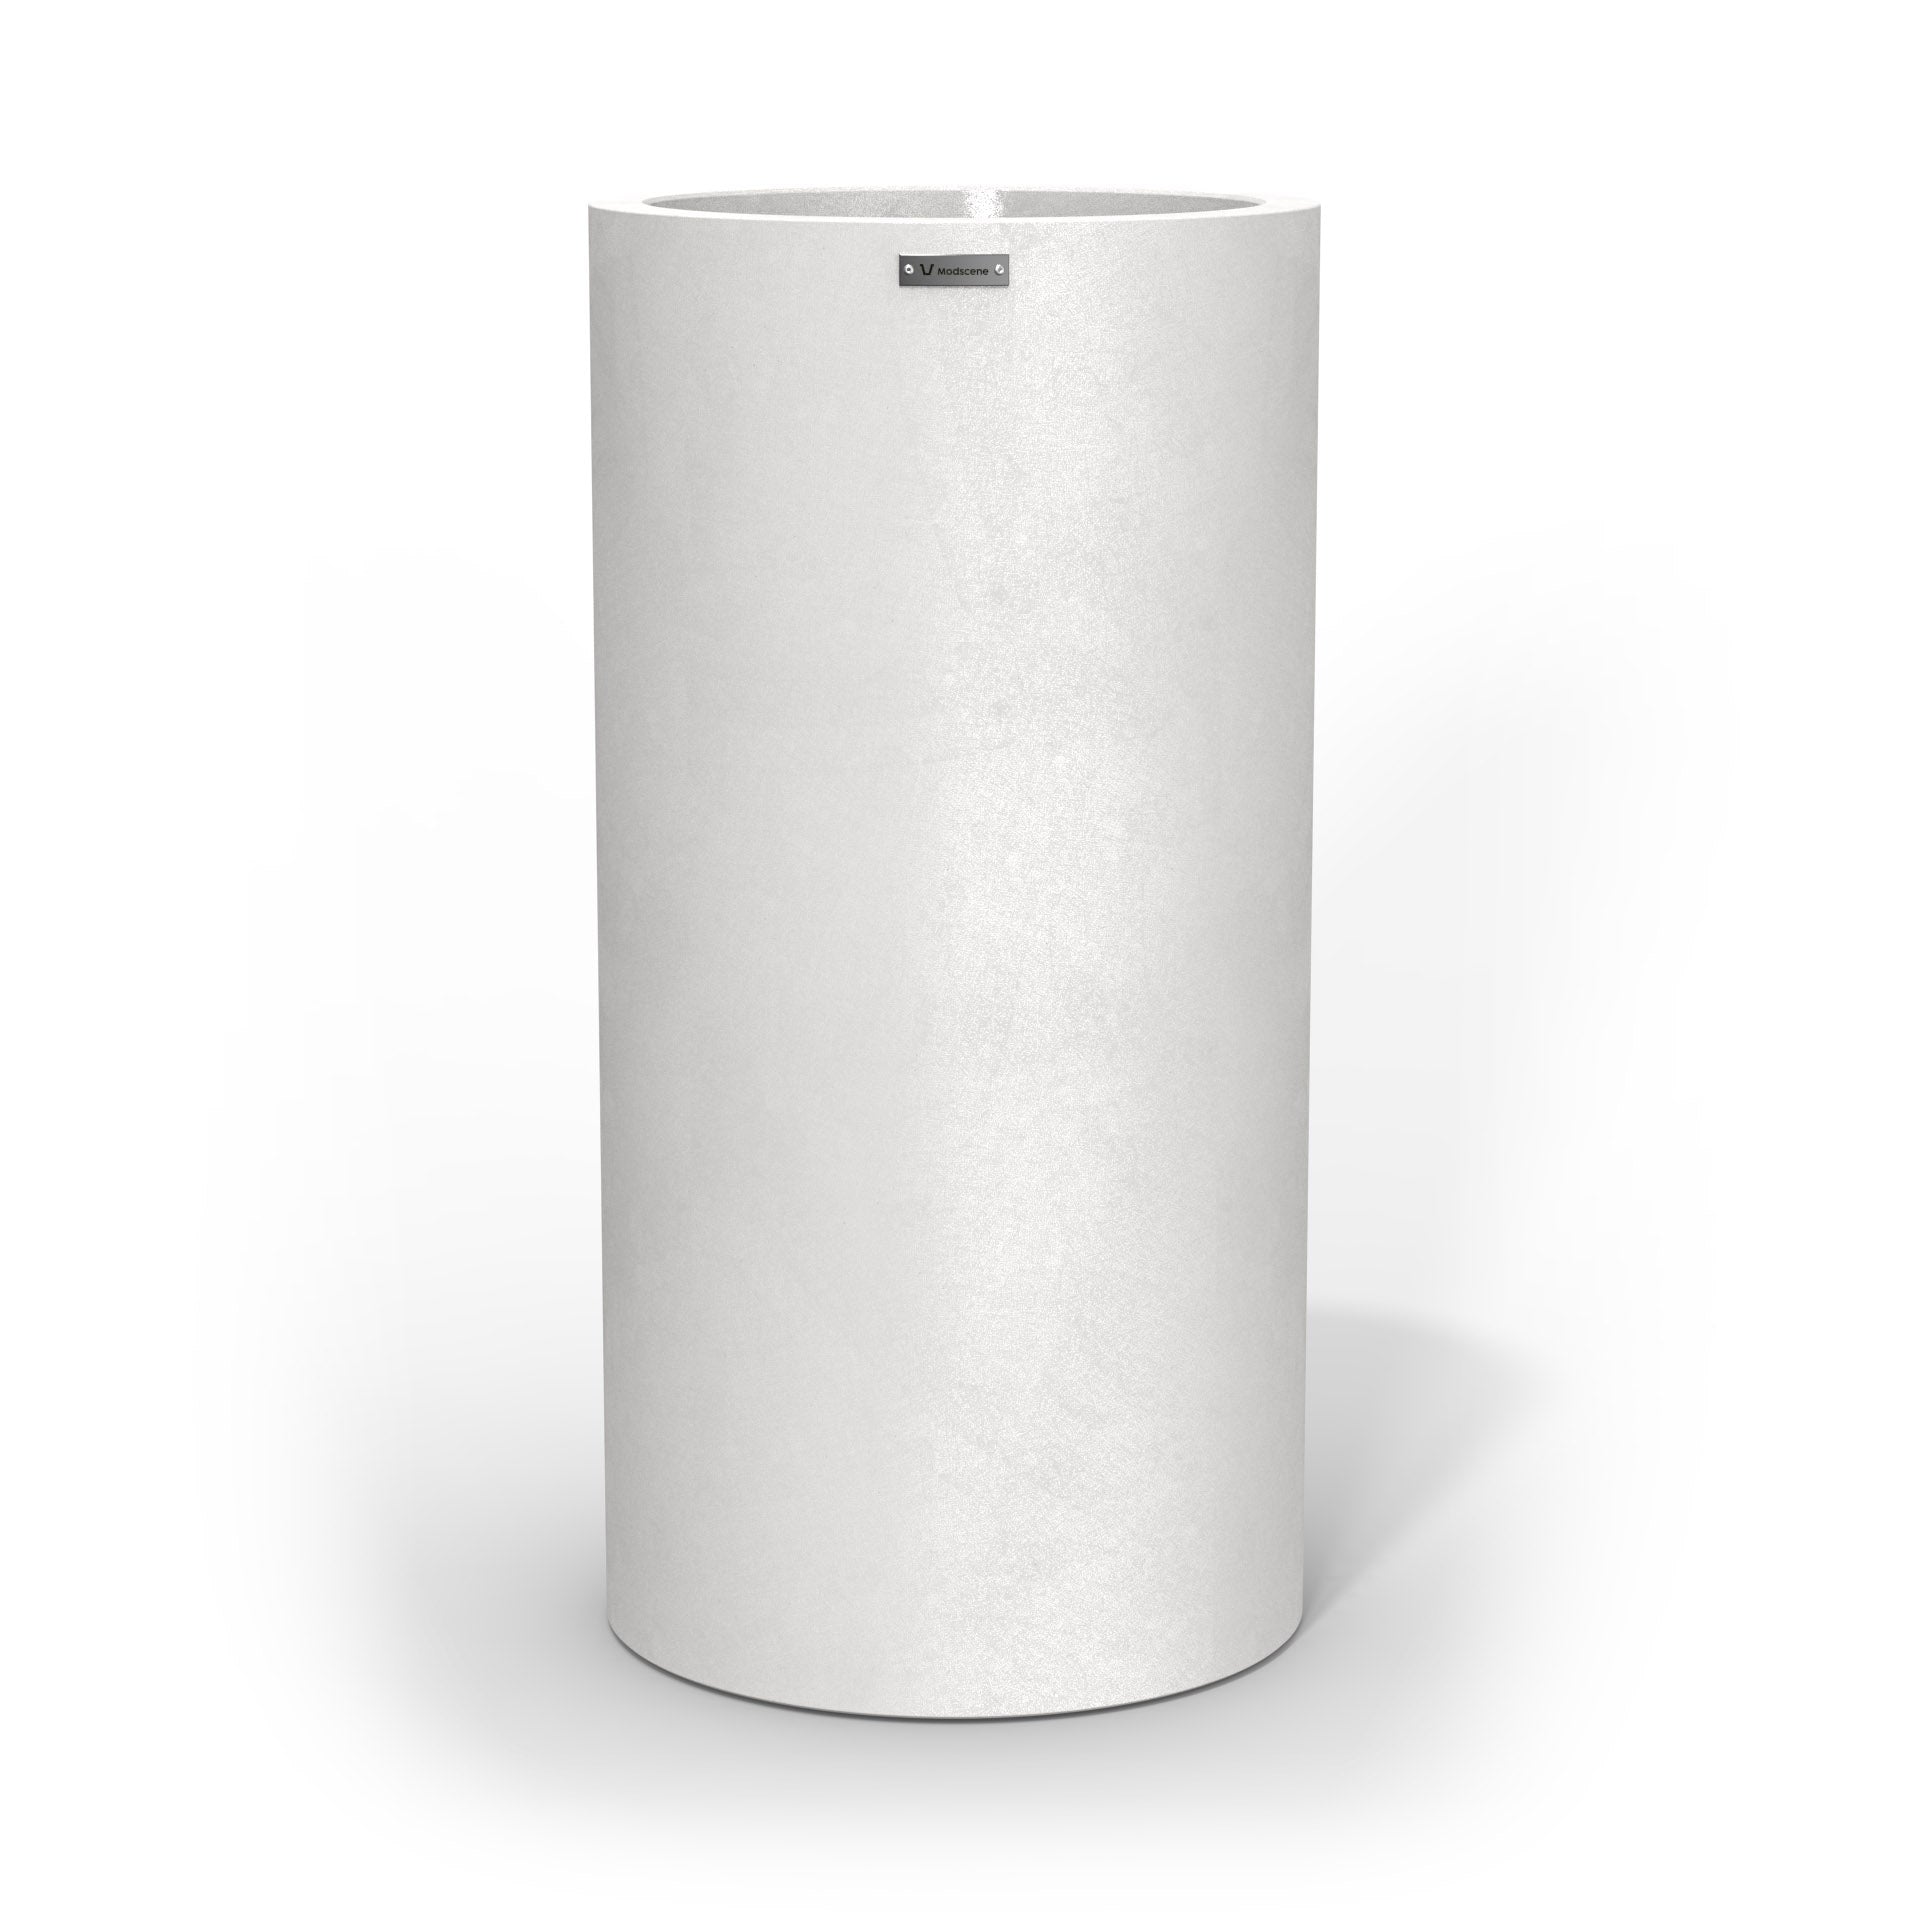 A tall cylinder planter pot in a matte white colour made by Modscene NZ.